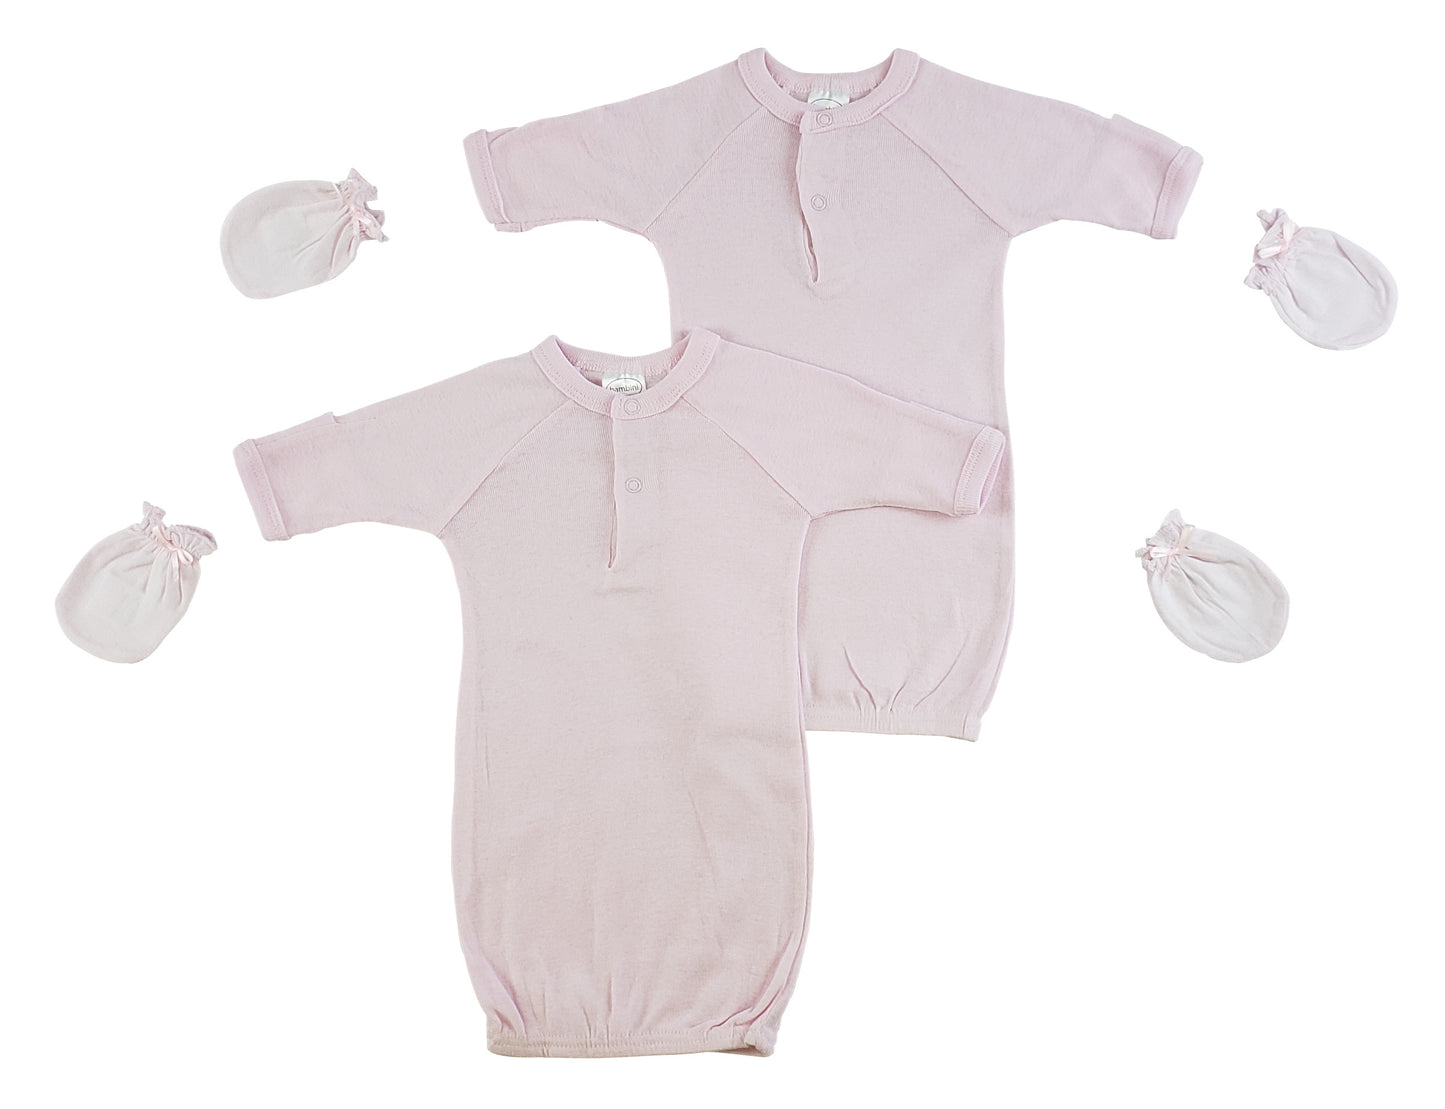 Preemie Girls Gowns and MIttens CS_0075